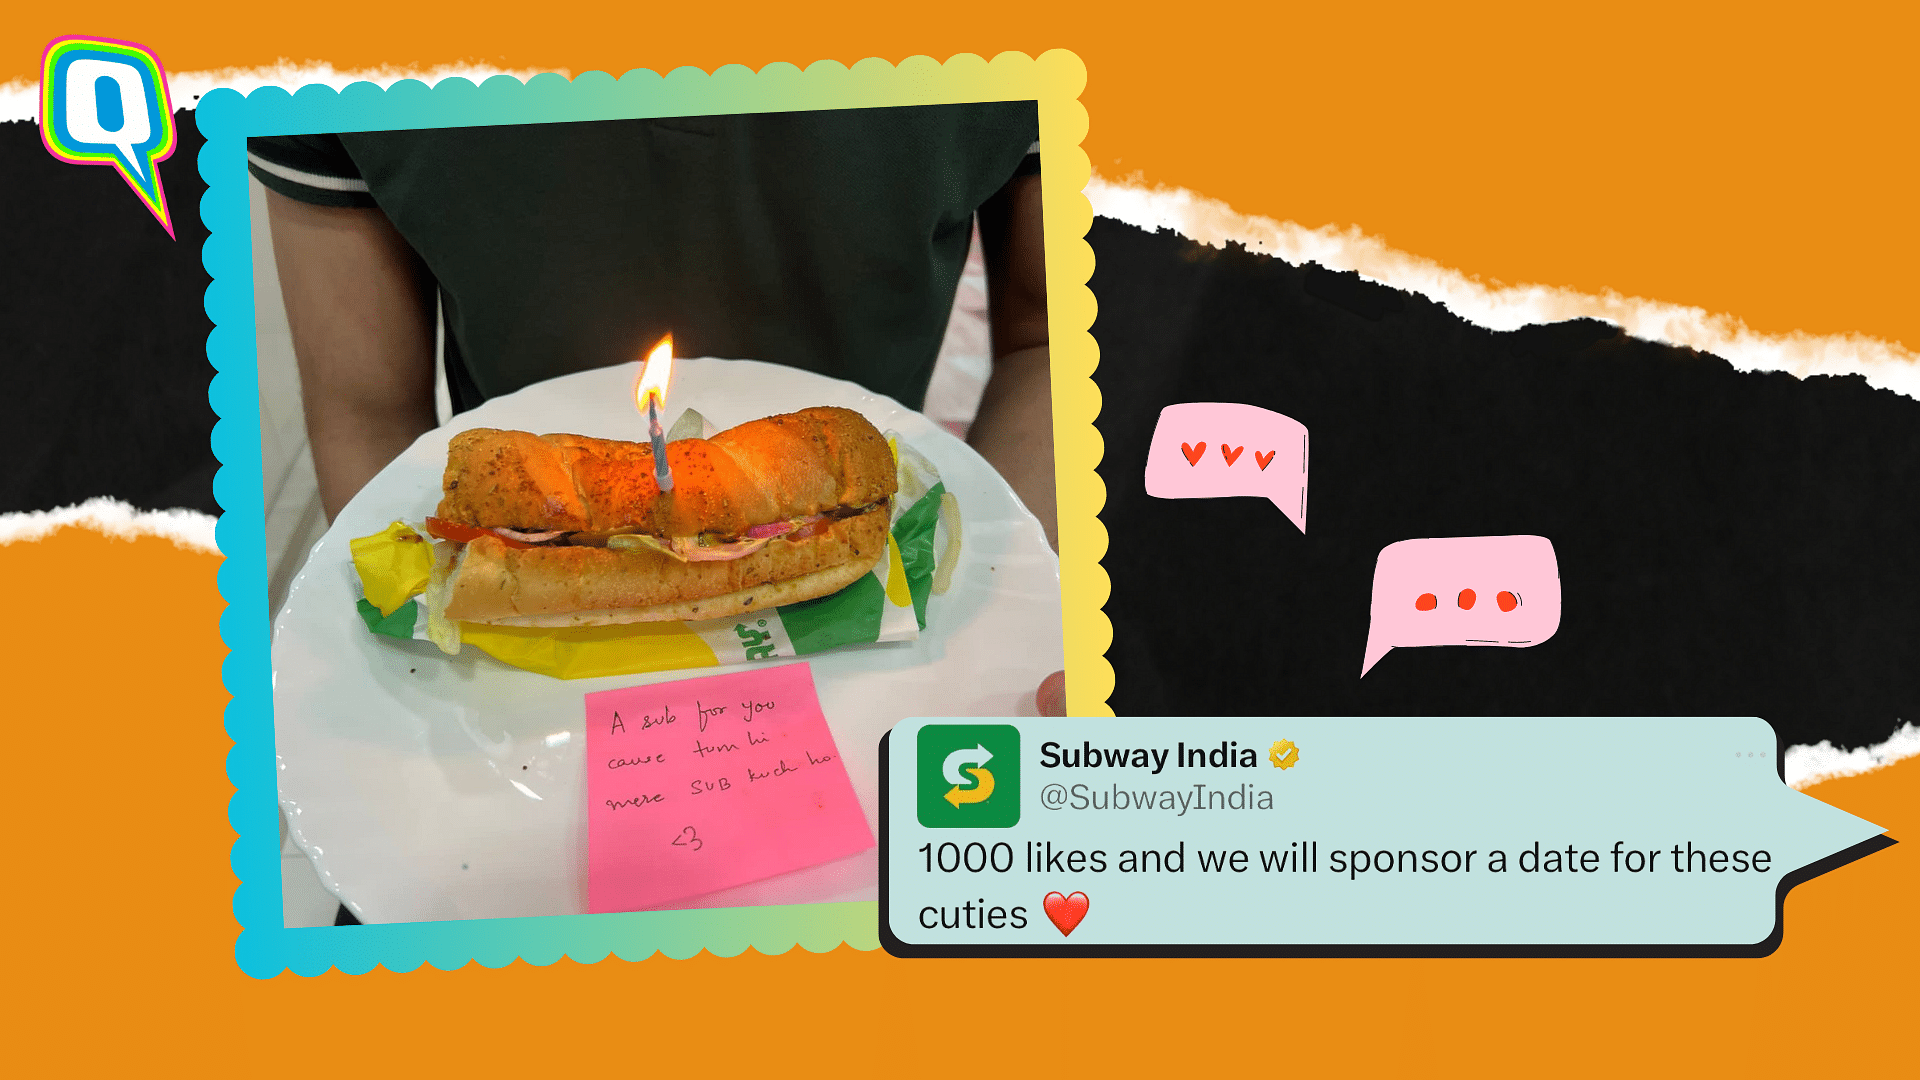 <div class="paragraphs"><p>In response, Subway India quoted the viral tweet and pledged, "1000 likes and we will sponsor a date for these cuties".</p></div>